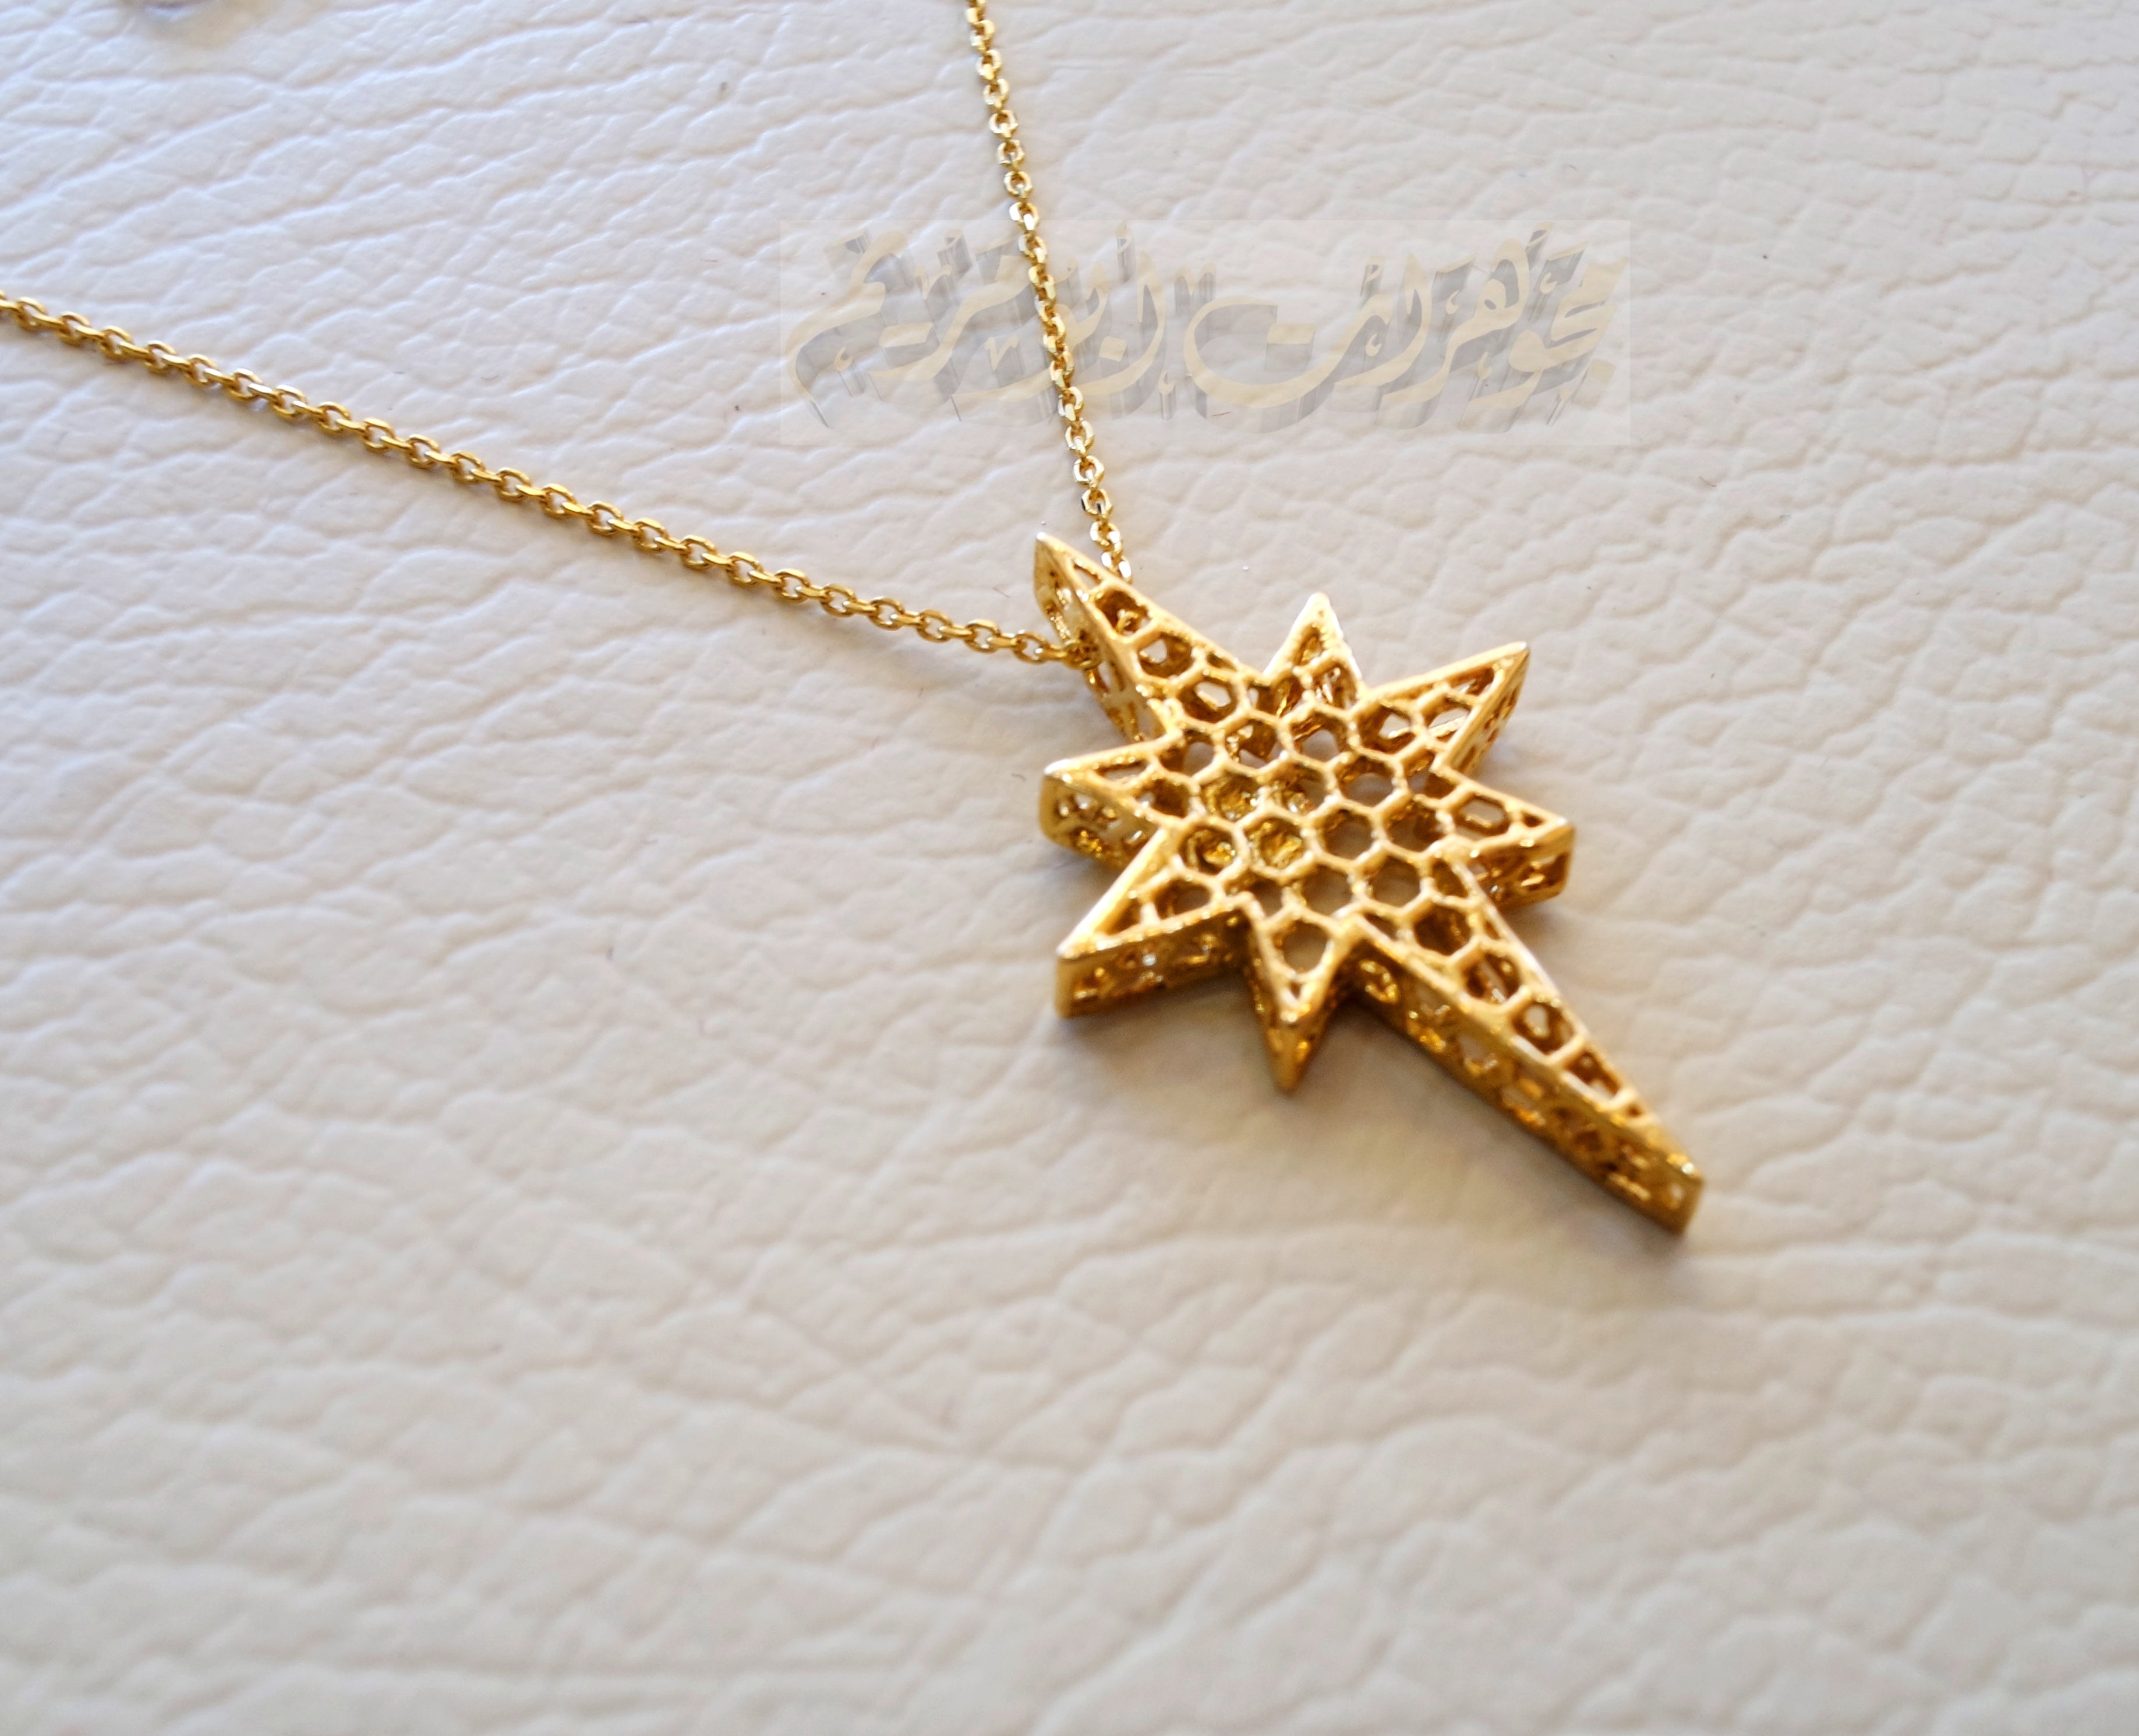 Honeycomb north star 3d 18K yellow gold necklace pendant and chain fine jewelry full insured shipping